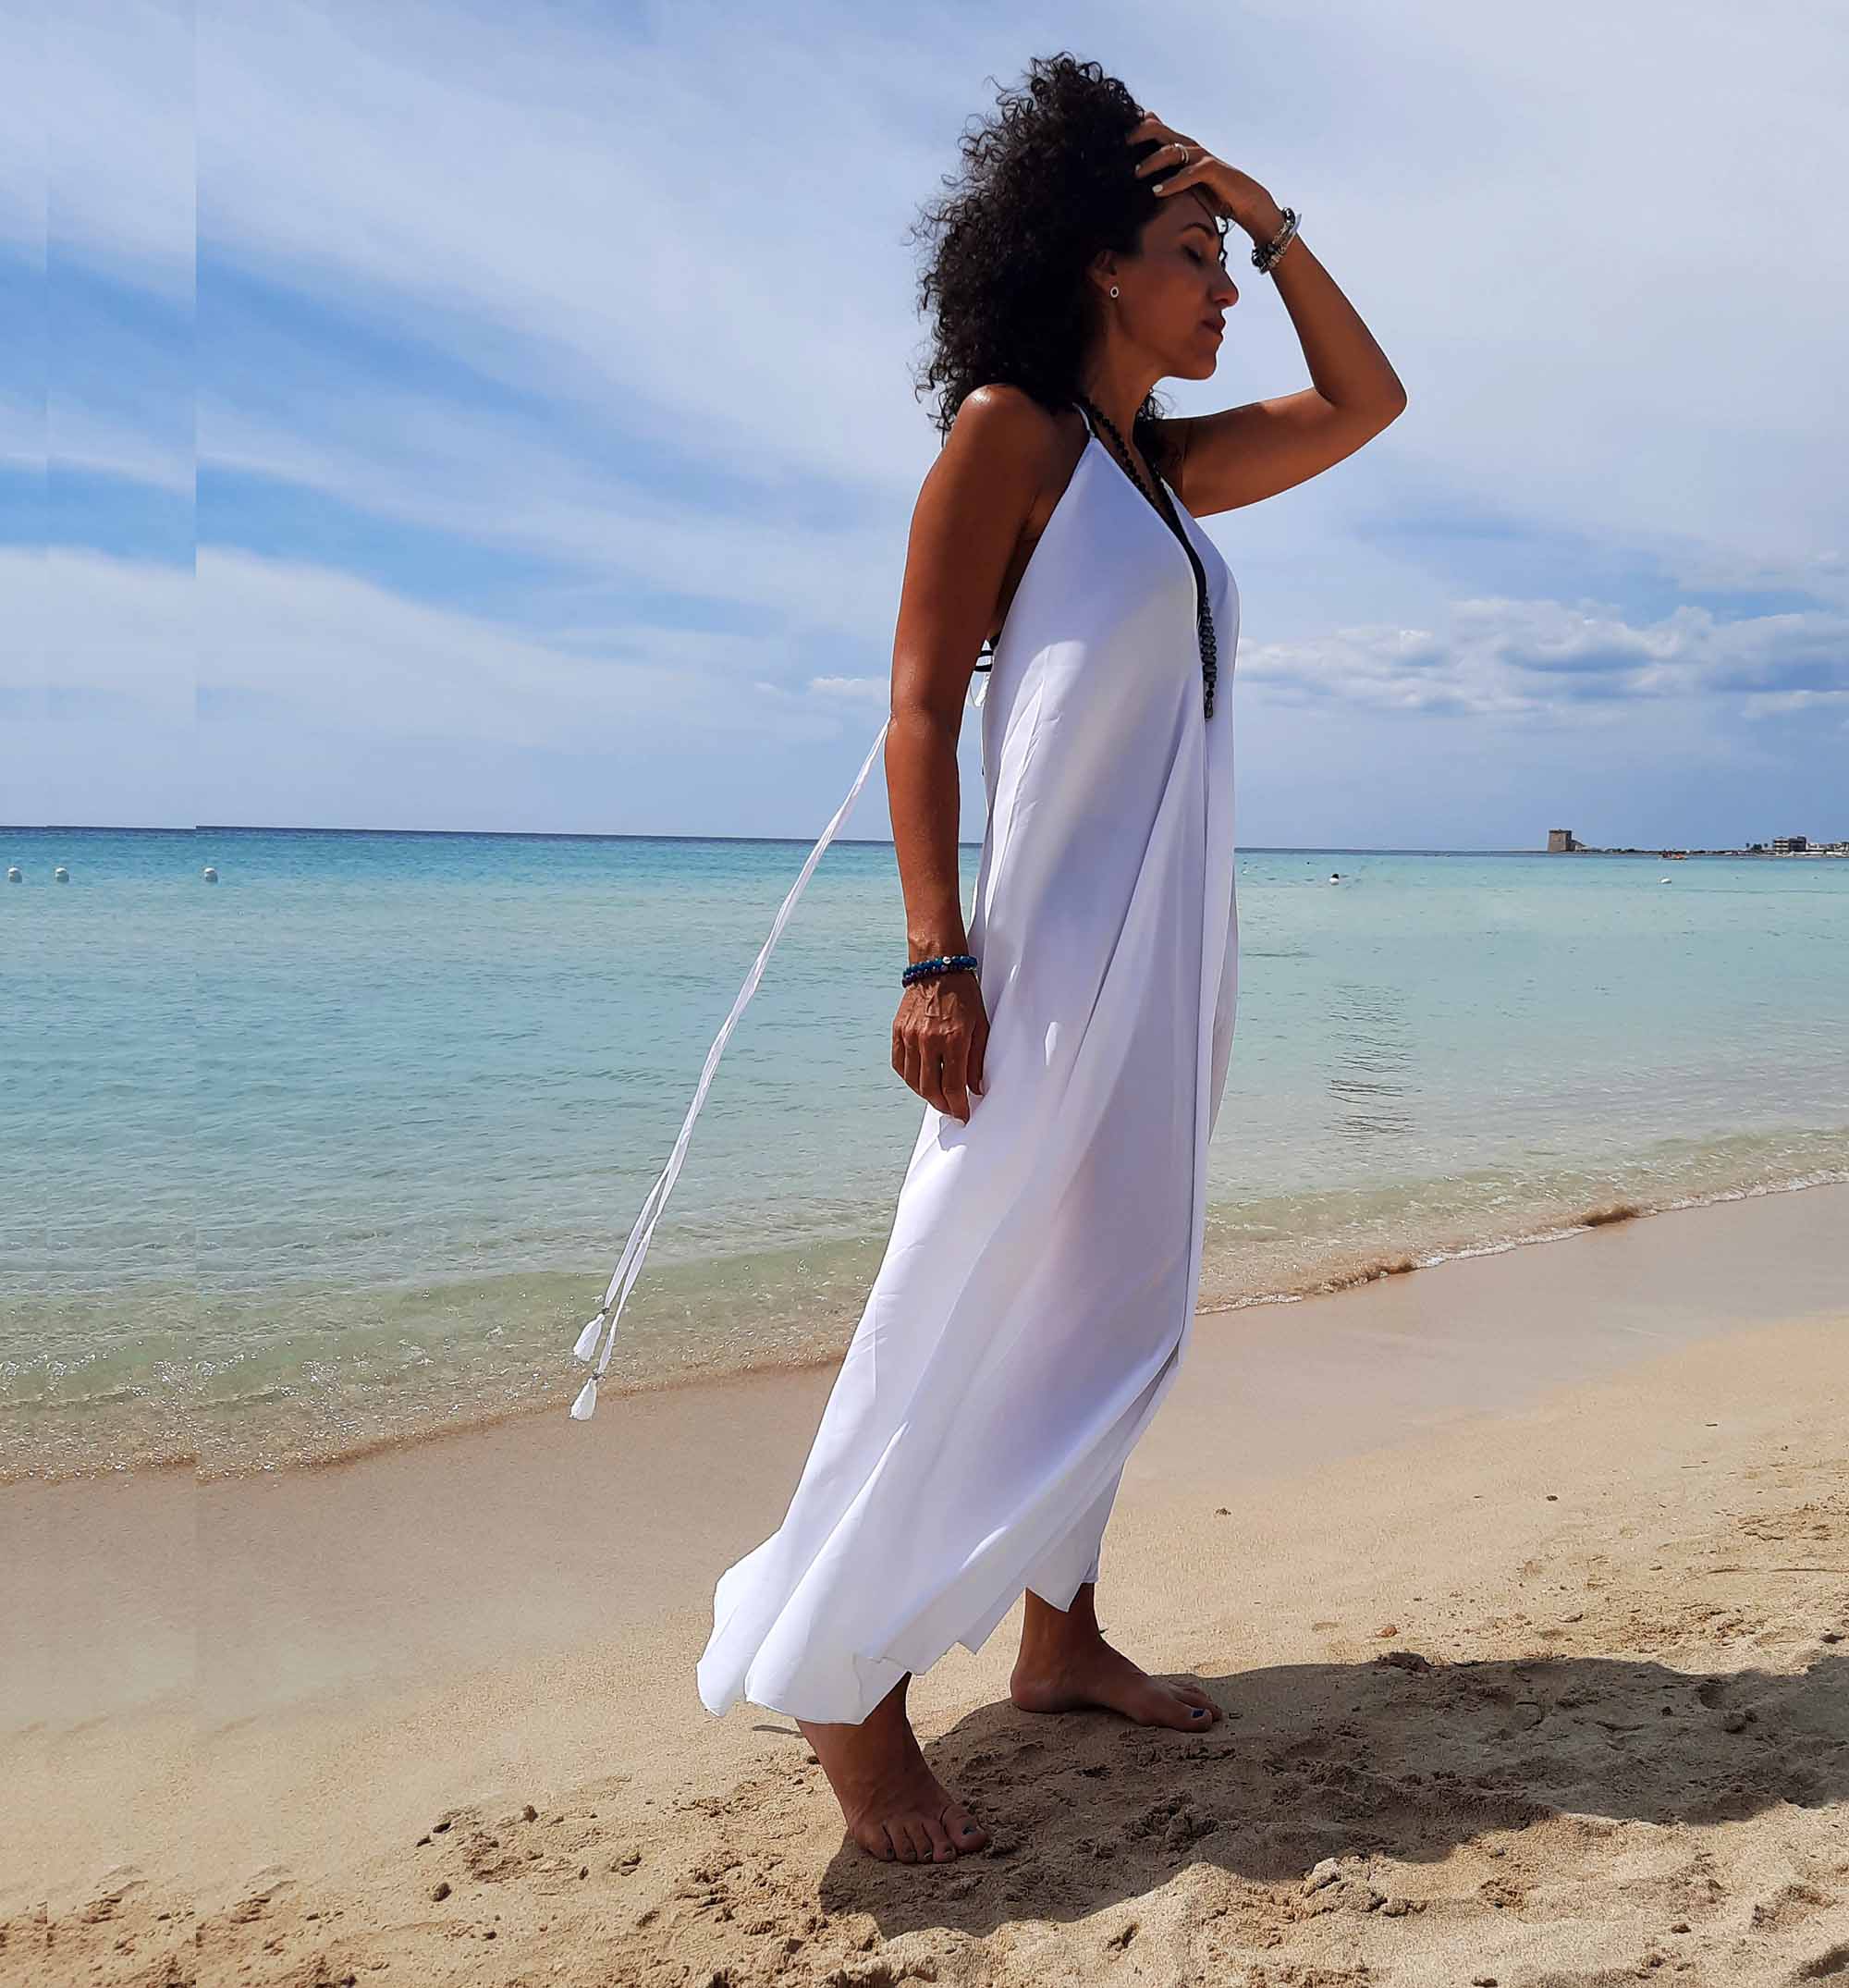 Follow Your Bliss White Strappy Backless Midi Dress  Beach white dress,  White maxi beach dress, Beach maxi dress